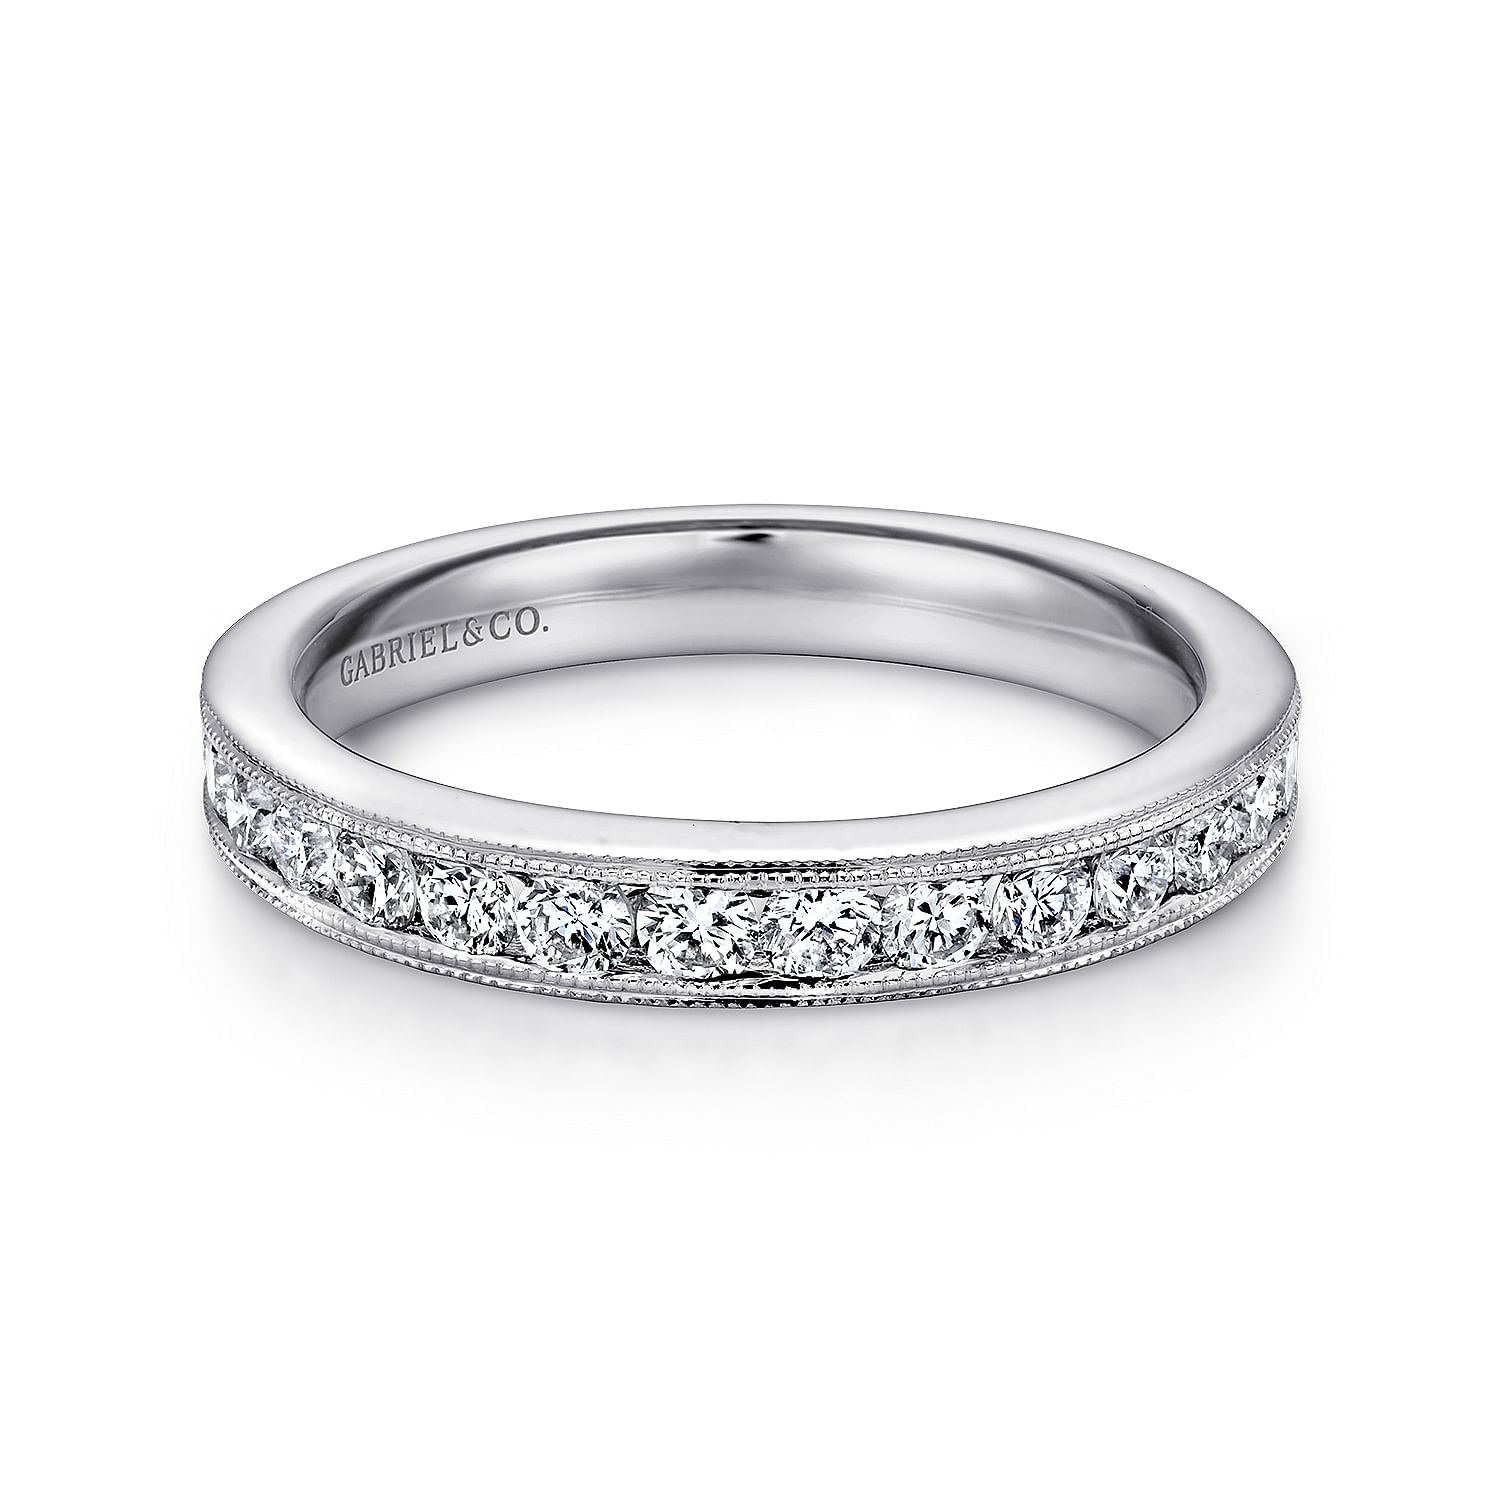 Macao - 14K White Gold Channel Set Diamond Wedding Band with Millgrain